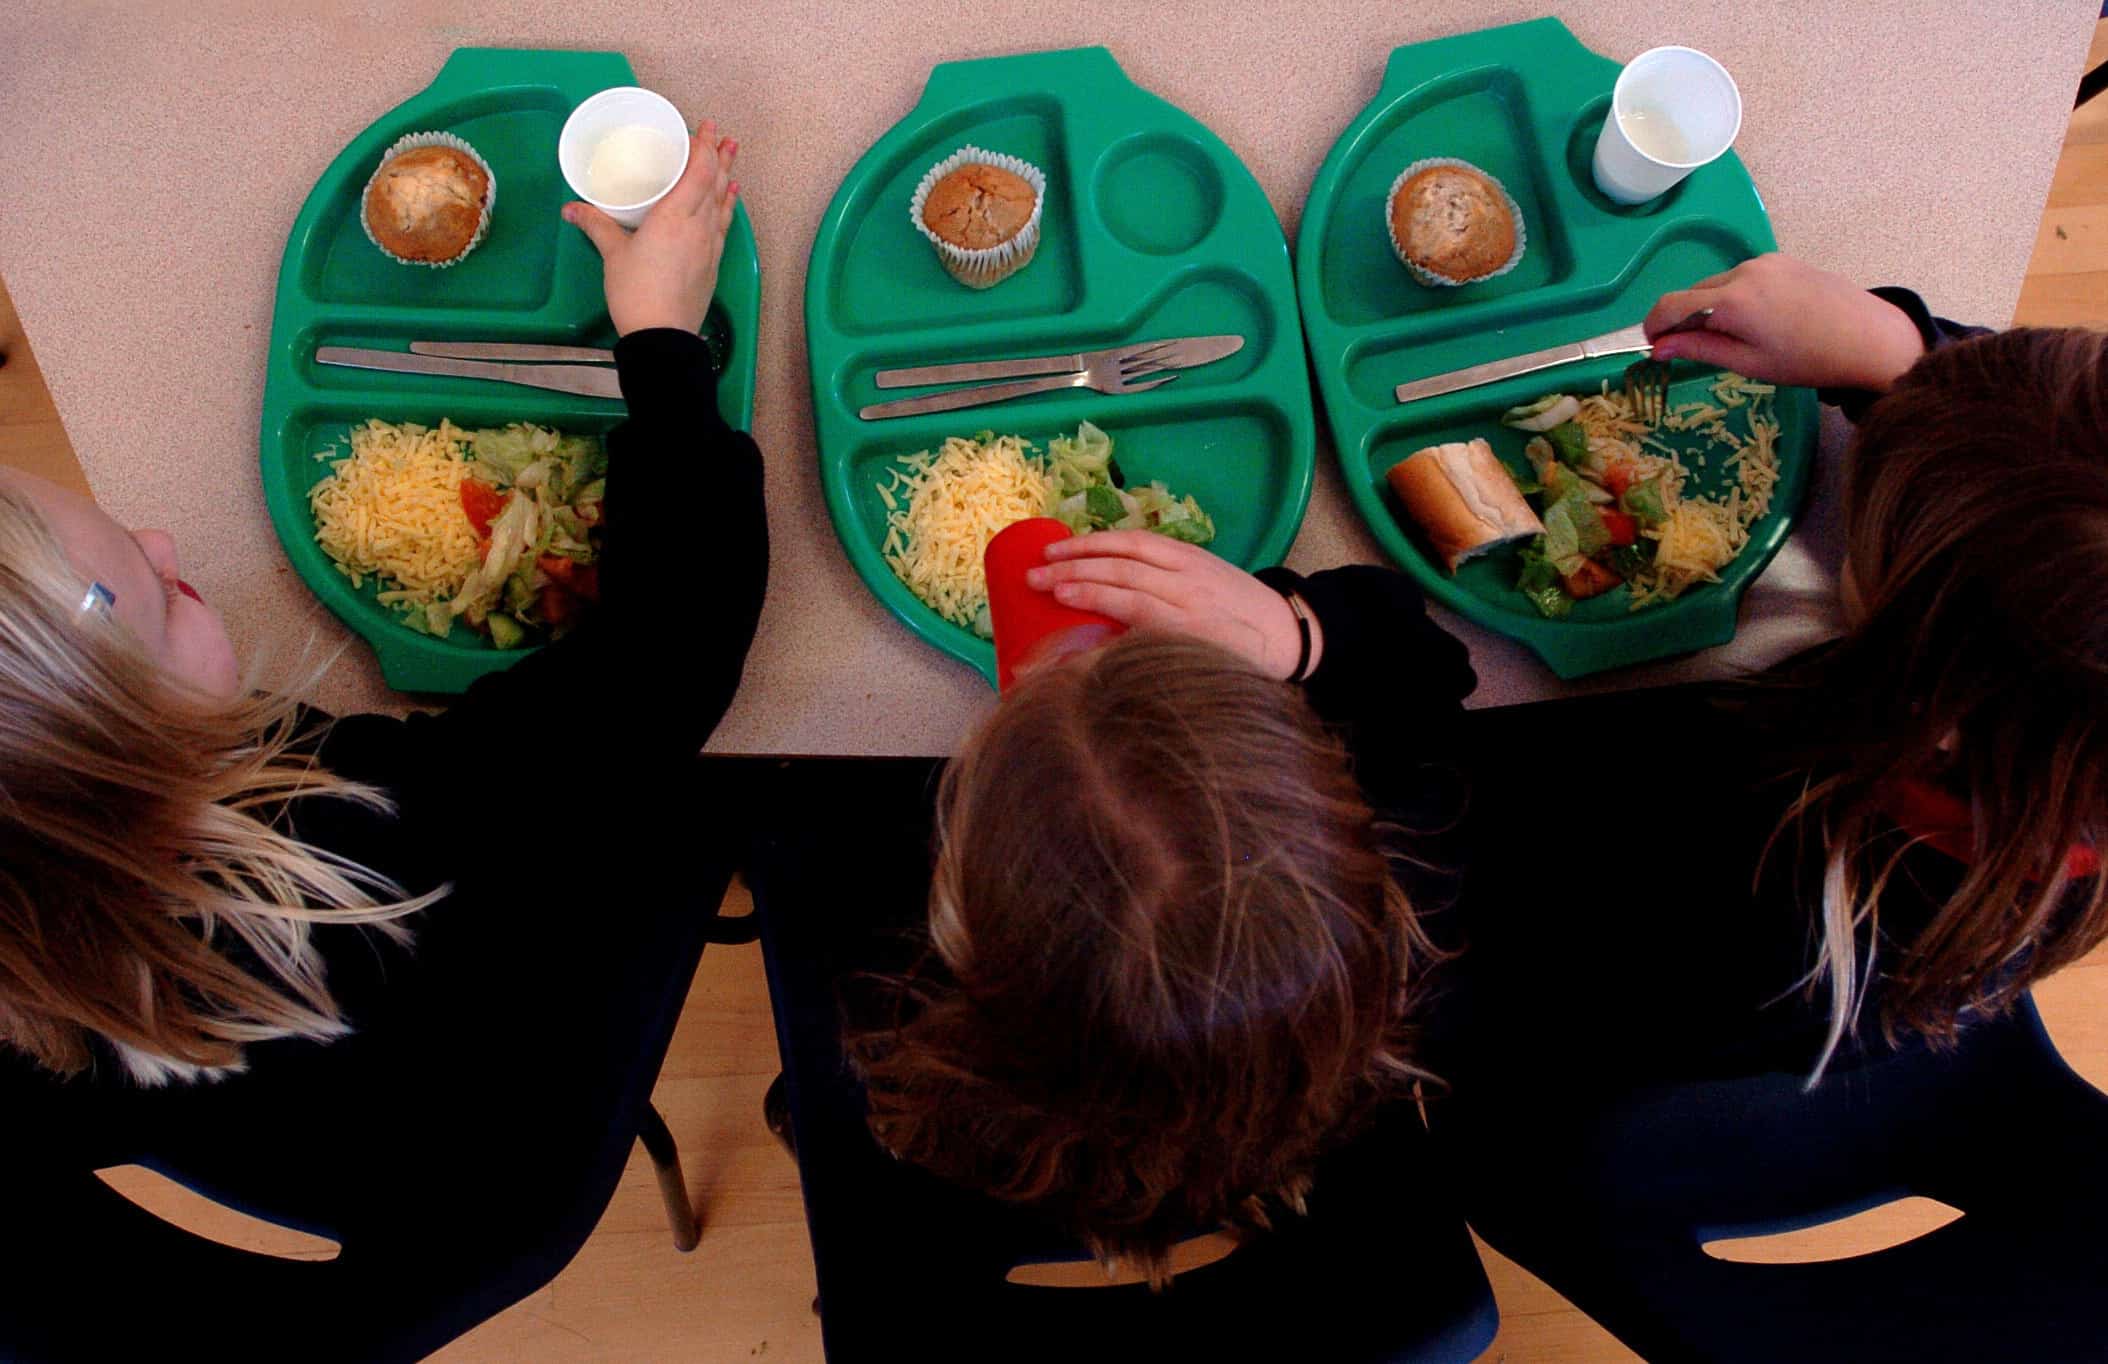 School dinners being cut back across country as fuel crisis bites